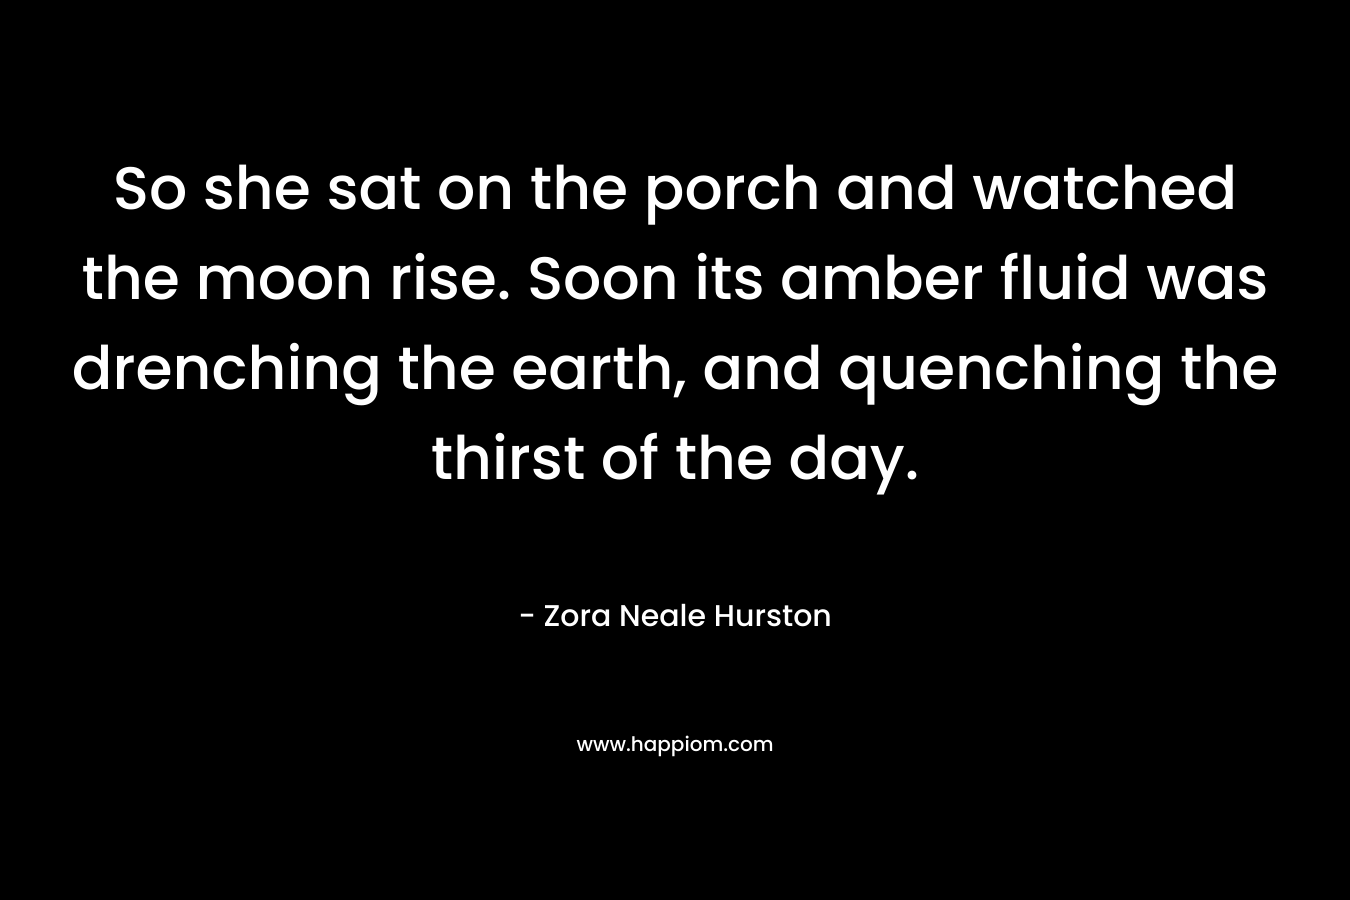 So she sat on the porch and watched the moon rise. Soon its amber fluid was drenching the earth, and quenching the thirst of the day.